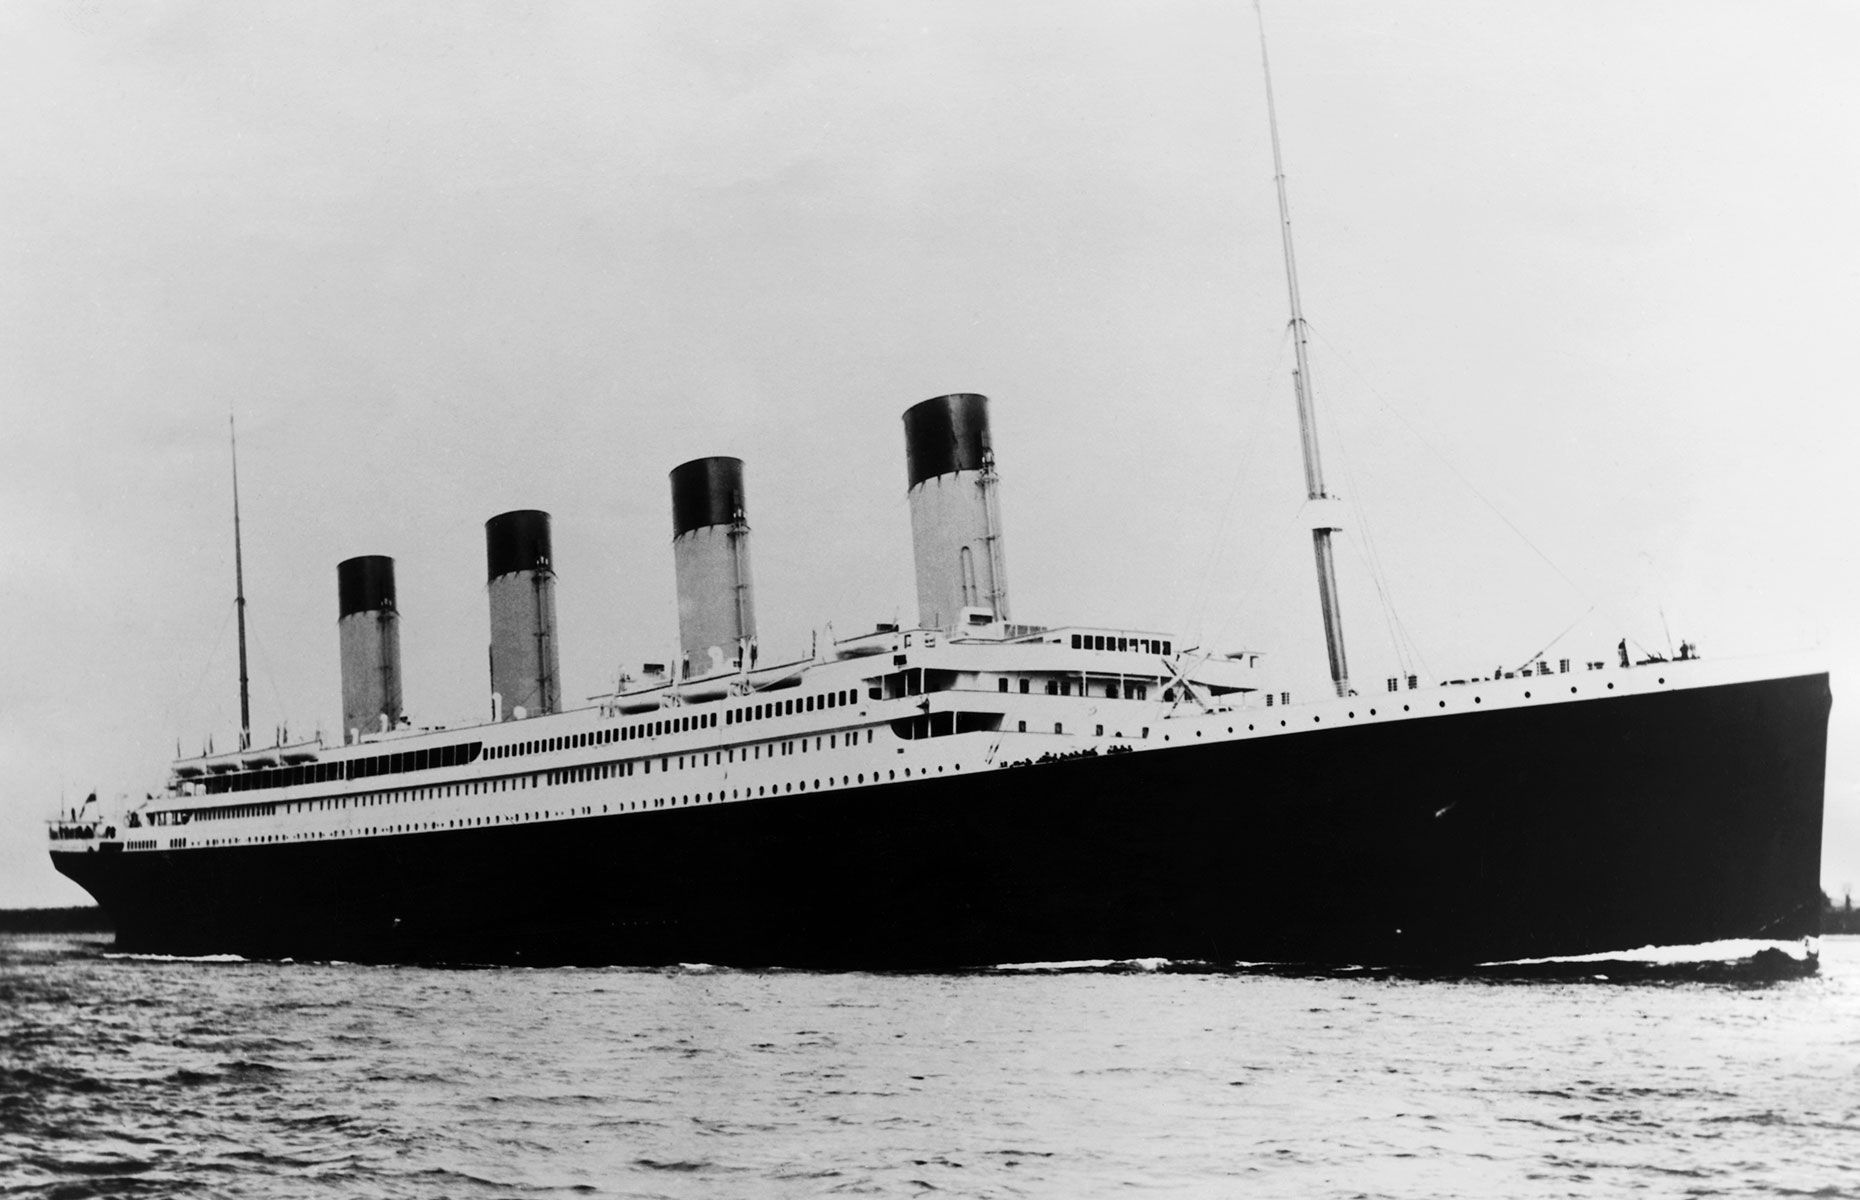 The tragic tale of the Titanic's lost sister ship